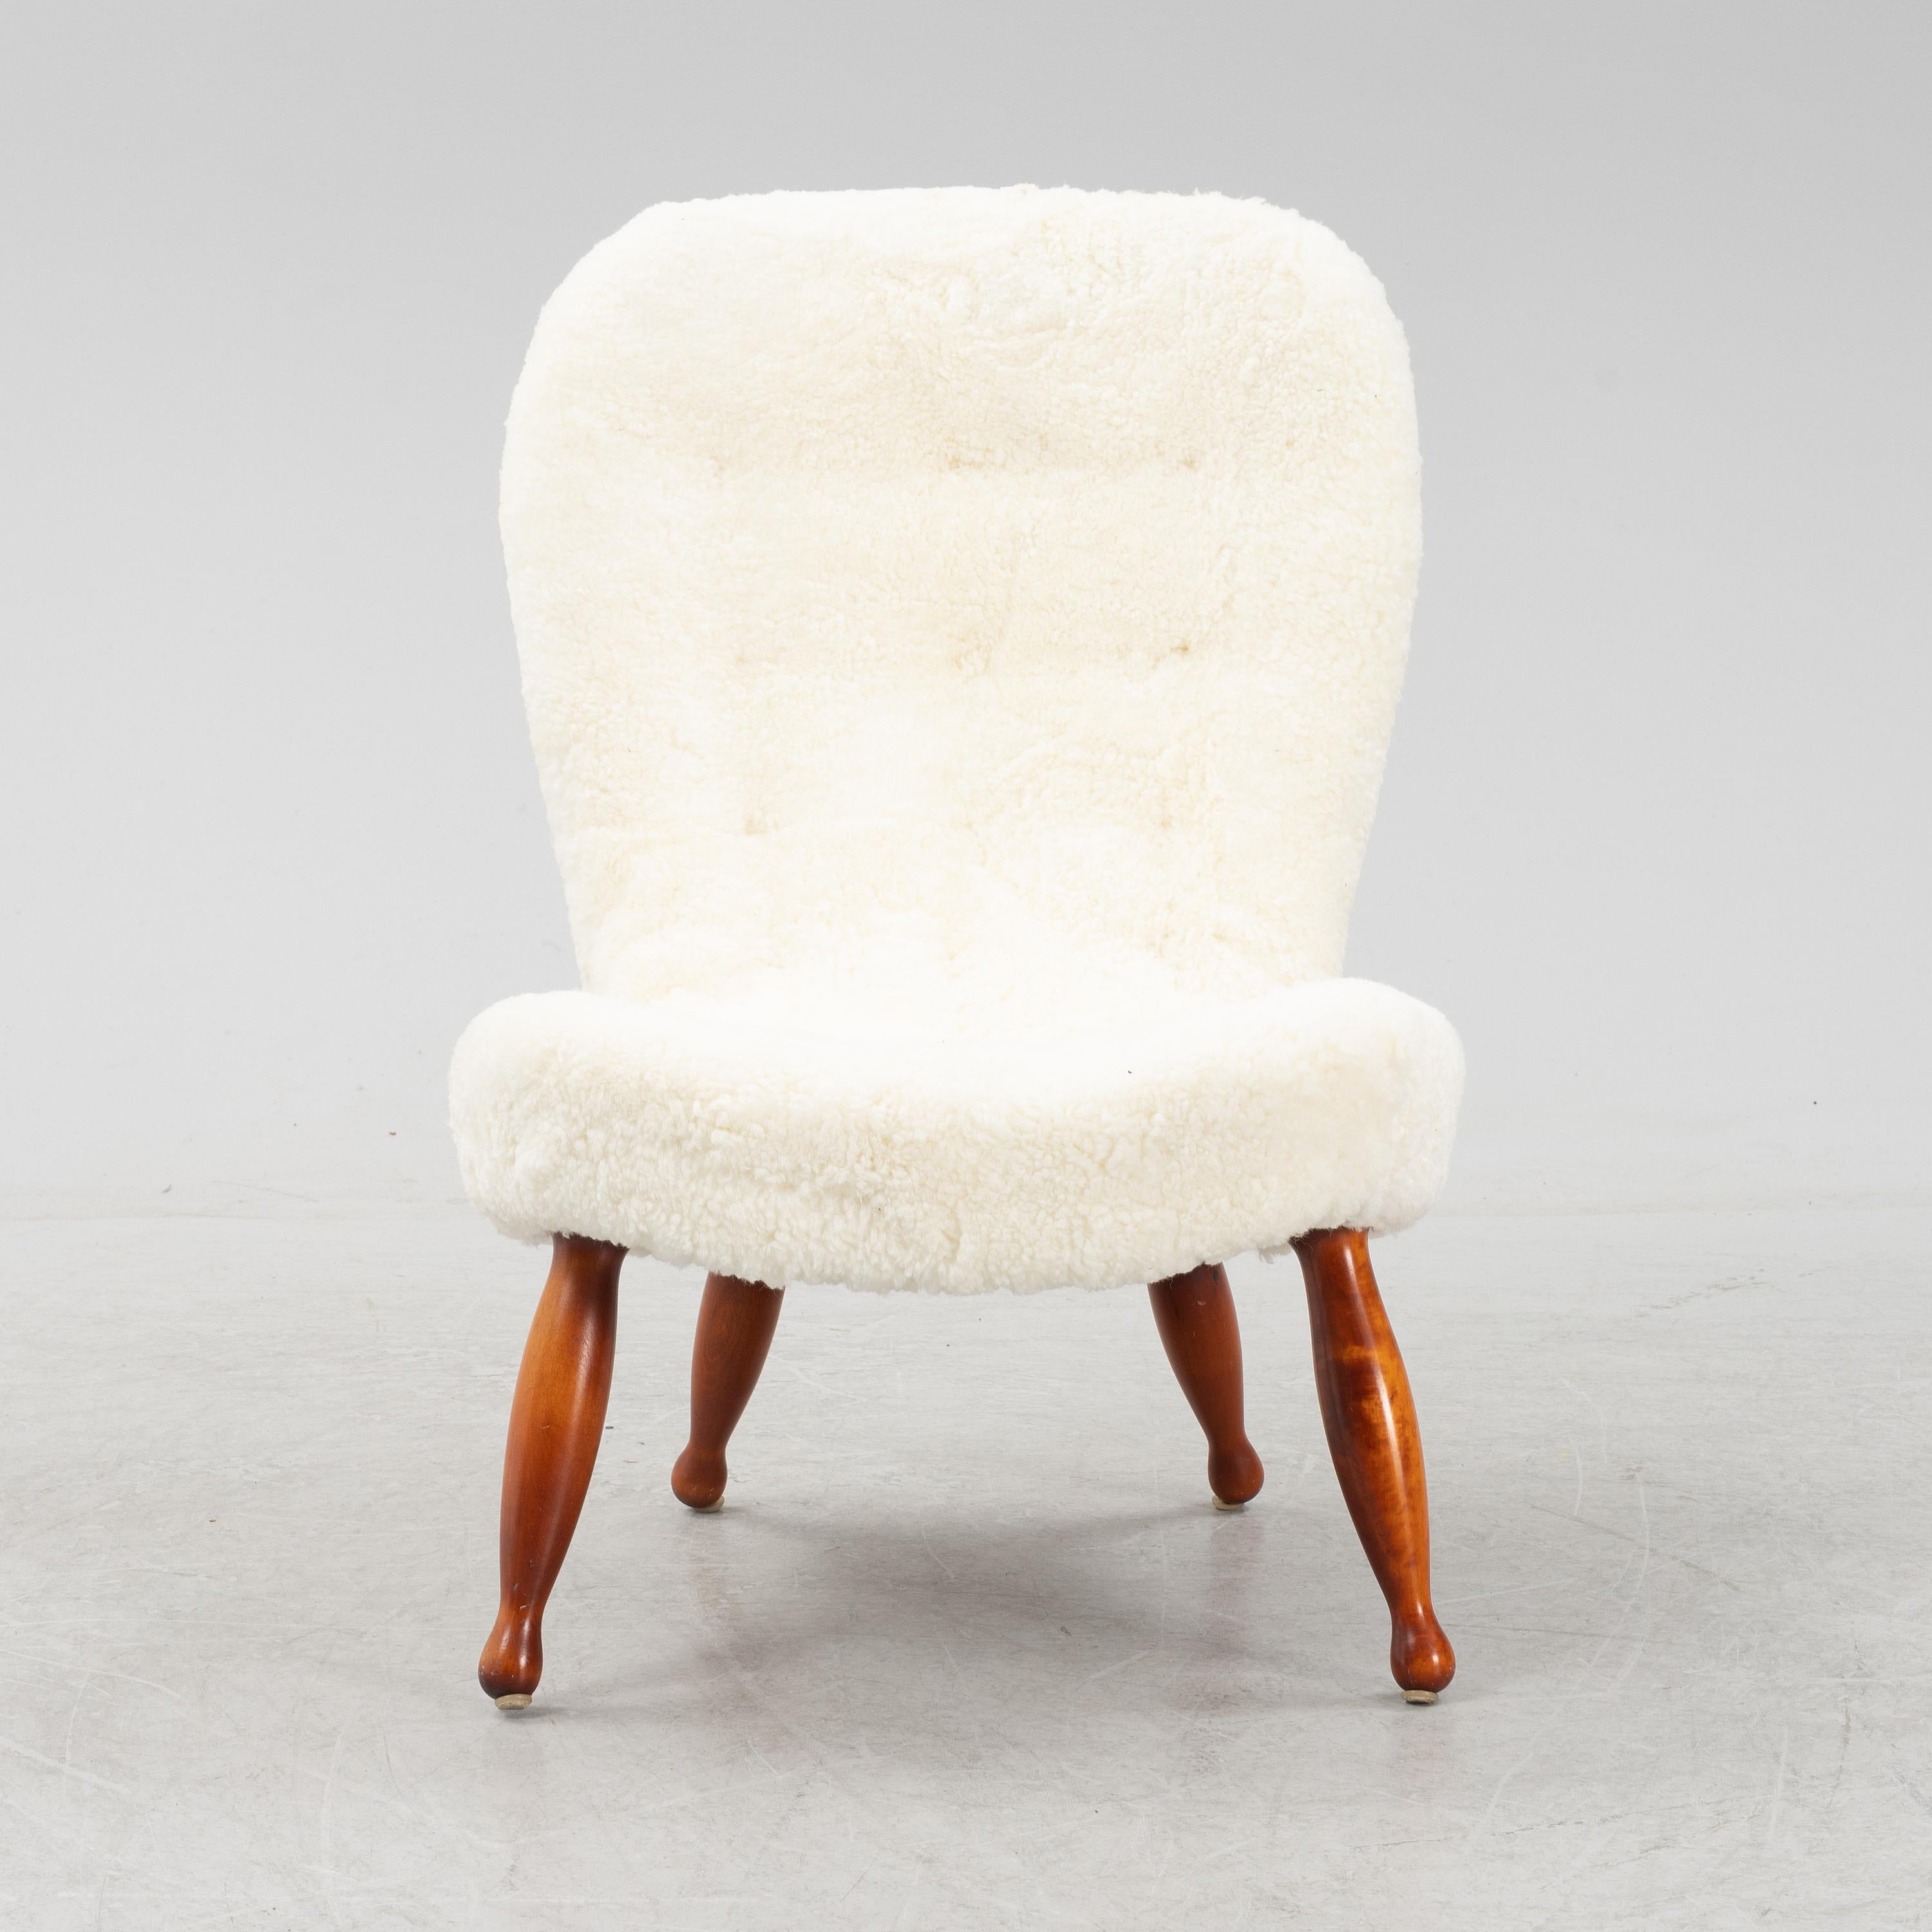 Rare easy chair (also known as Clam Chair) Attributed to Arnold Madsen for Madsen & Schubell in Denmark, 1940s.